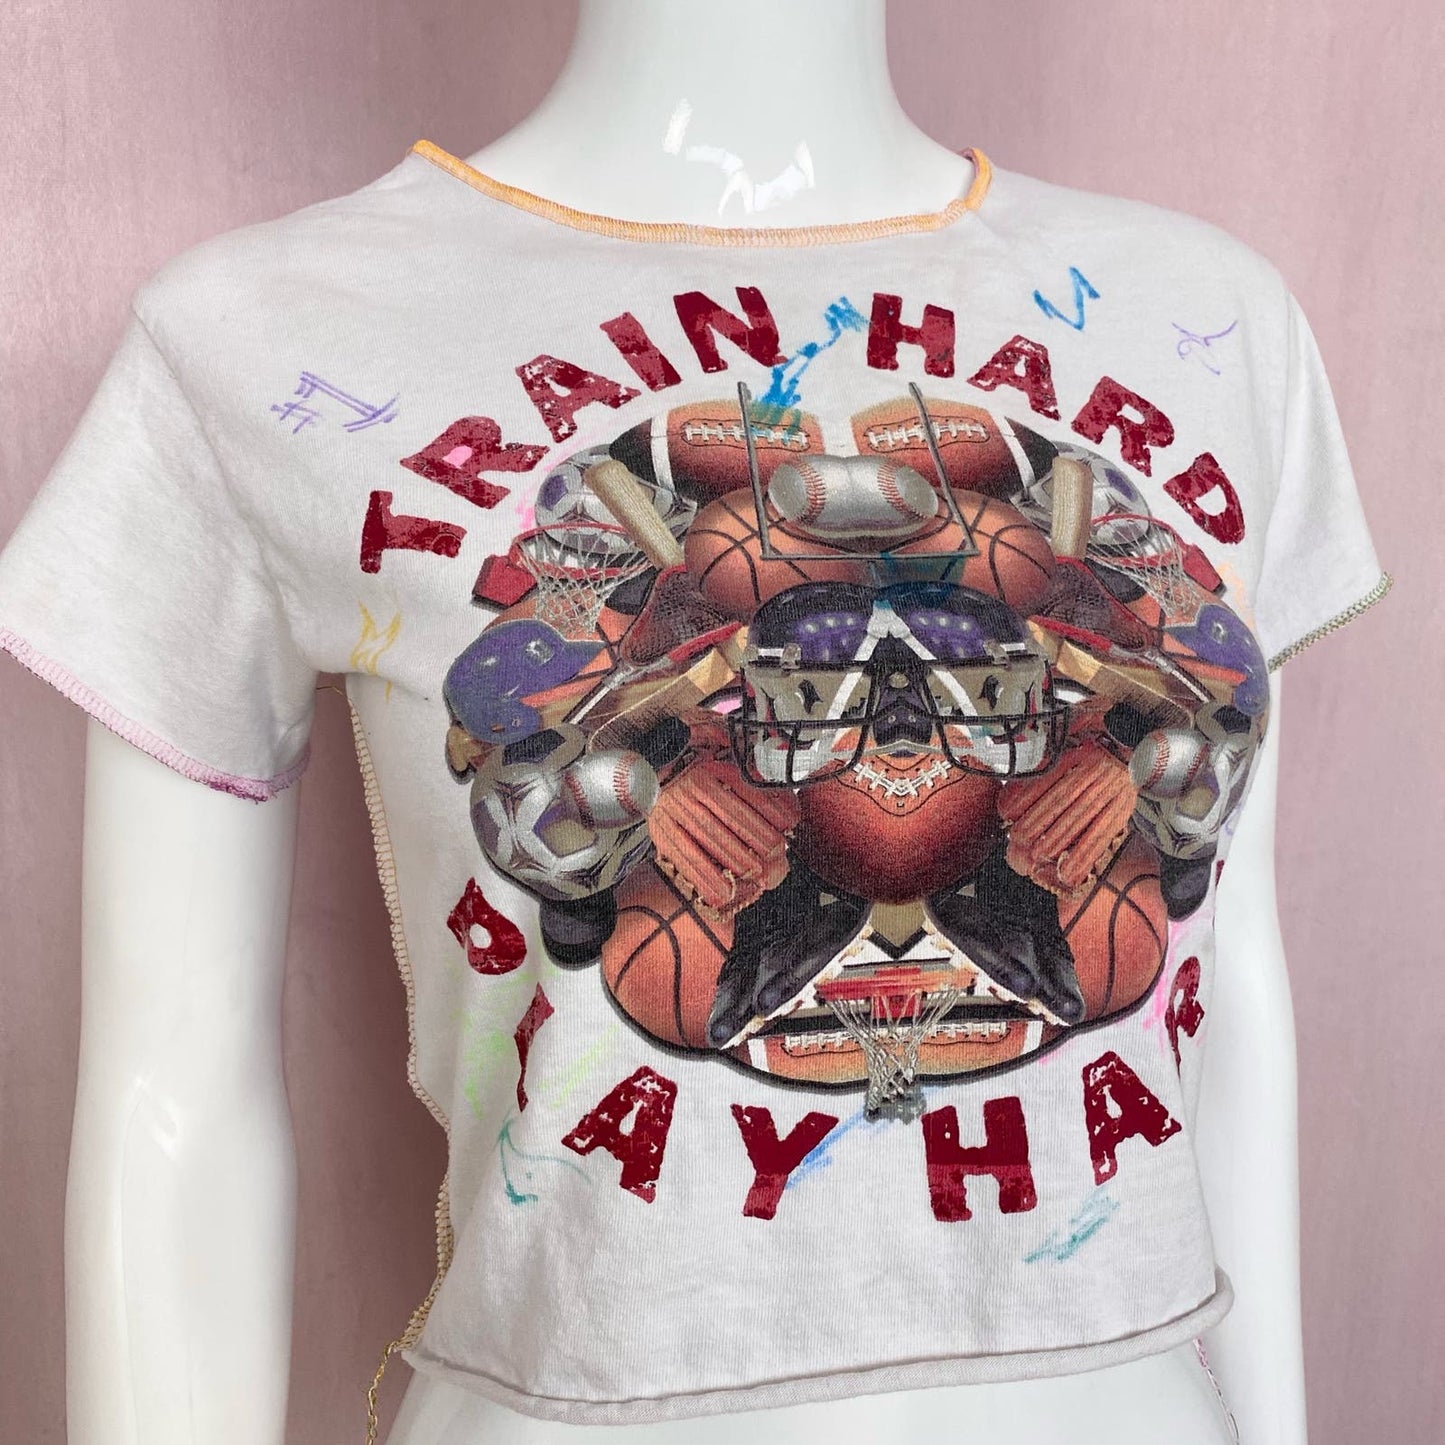 Upcycled Train Hard Play Hard Graphic Crop Baby Tee, Size XS